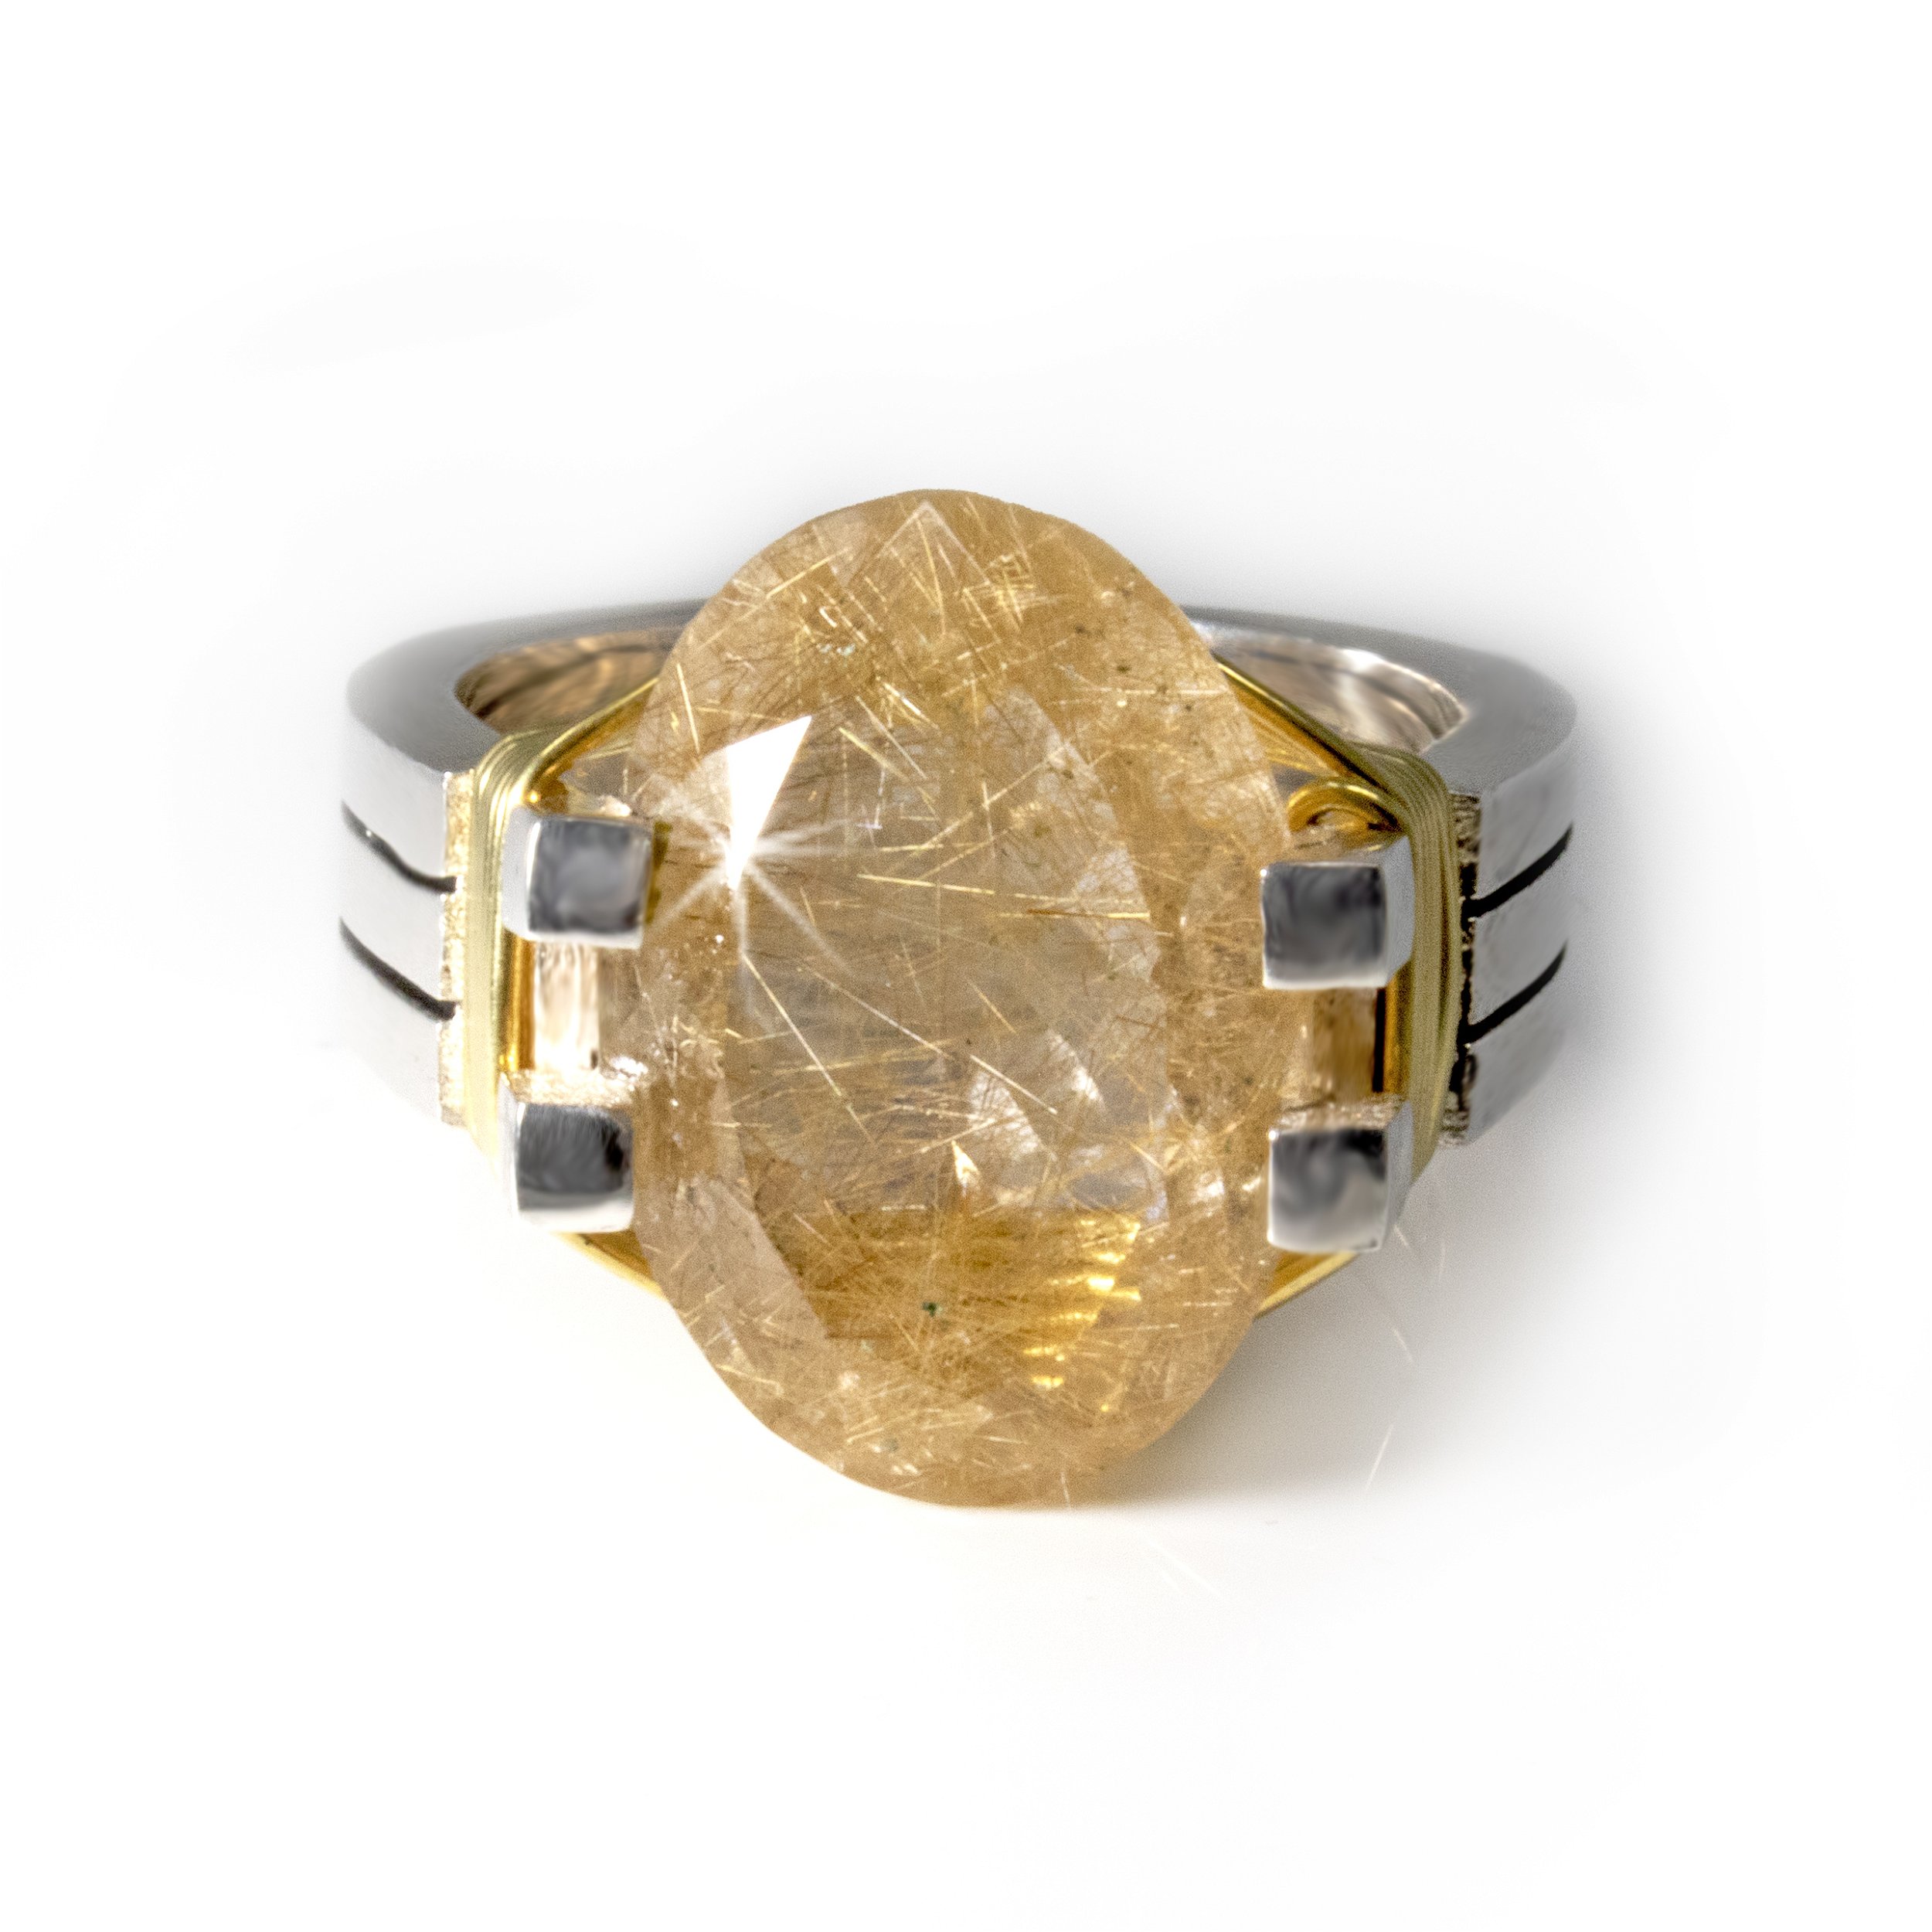 Faceted Golden Rutile Quartz Ring - Oval Prong Set In Sleek Industrial Design Band With 24k Gold Vermeil Wire Wrap Size 8